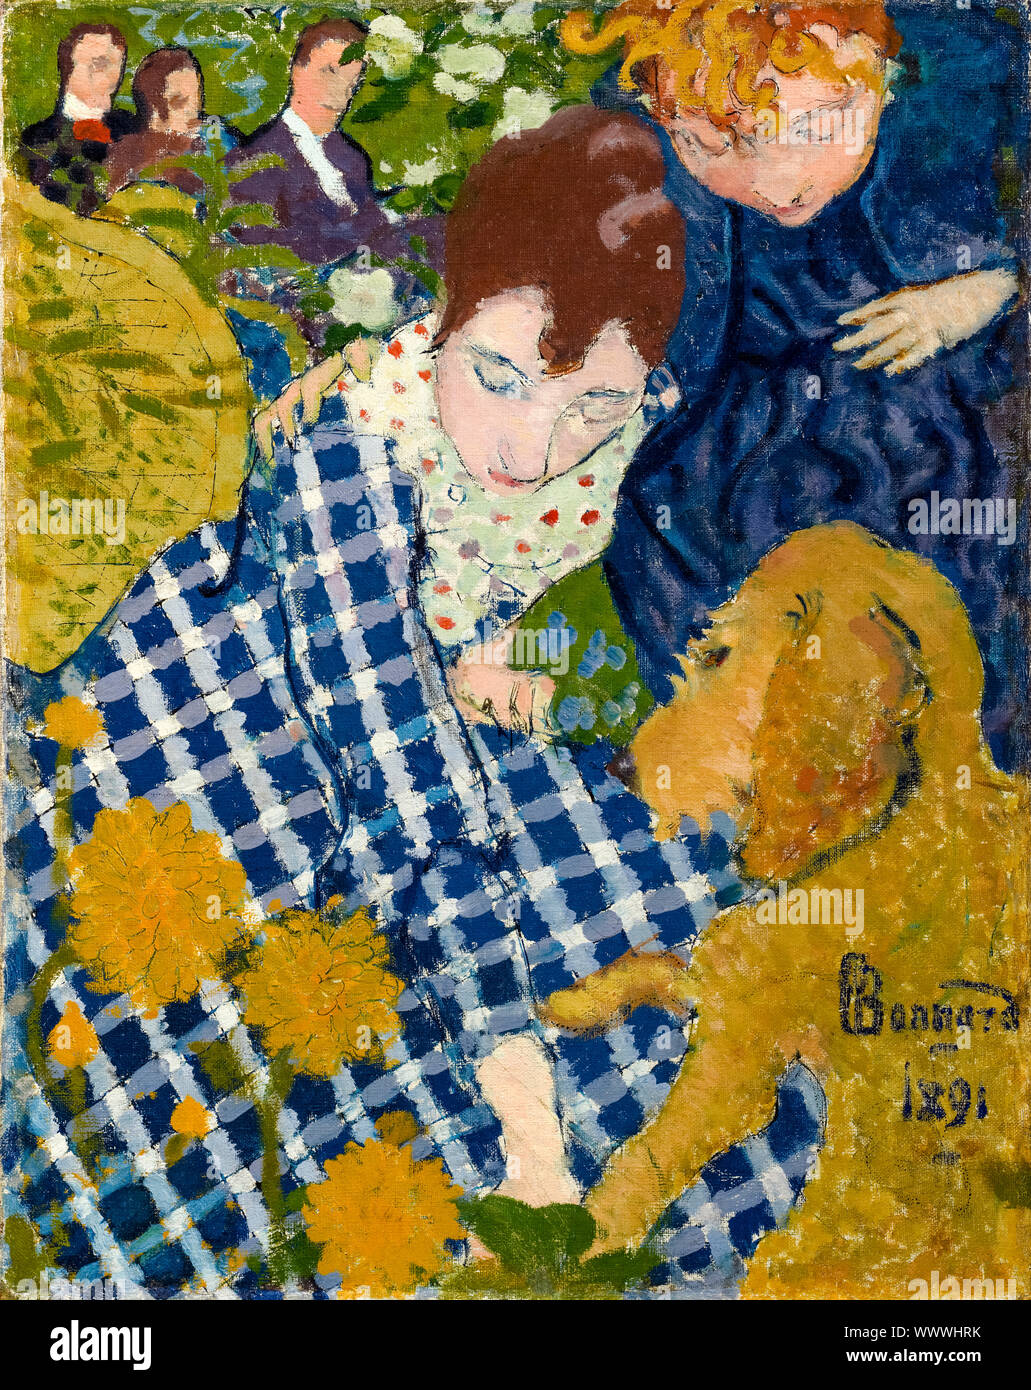 Pierre Bonnard, painting, Women with a Dog, 1891 Stock Photo